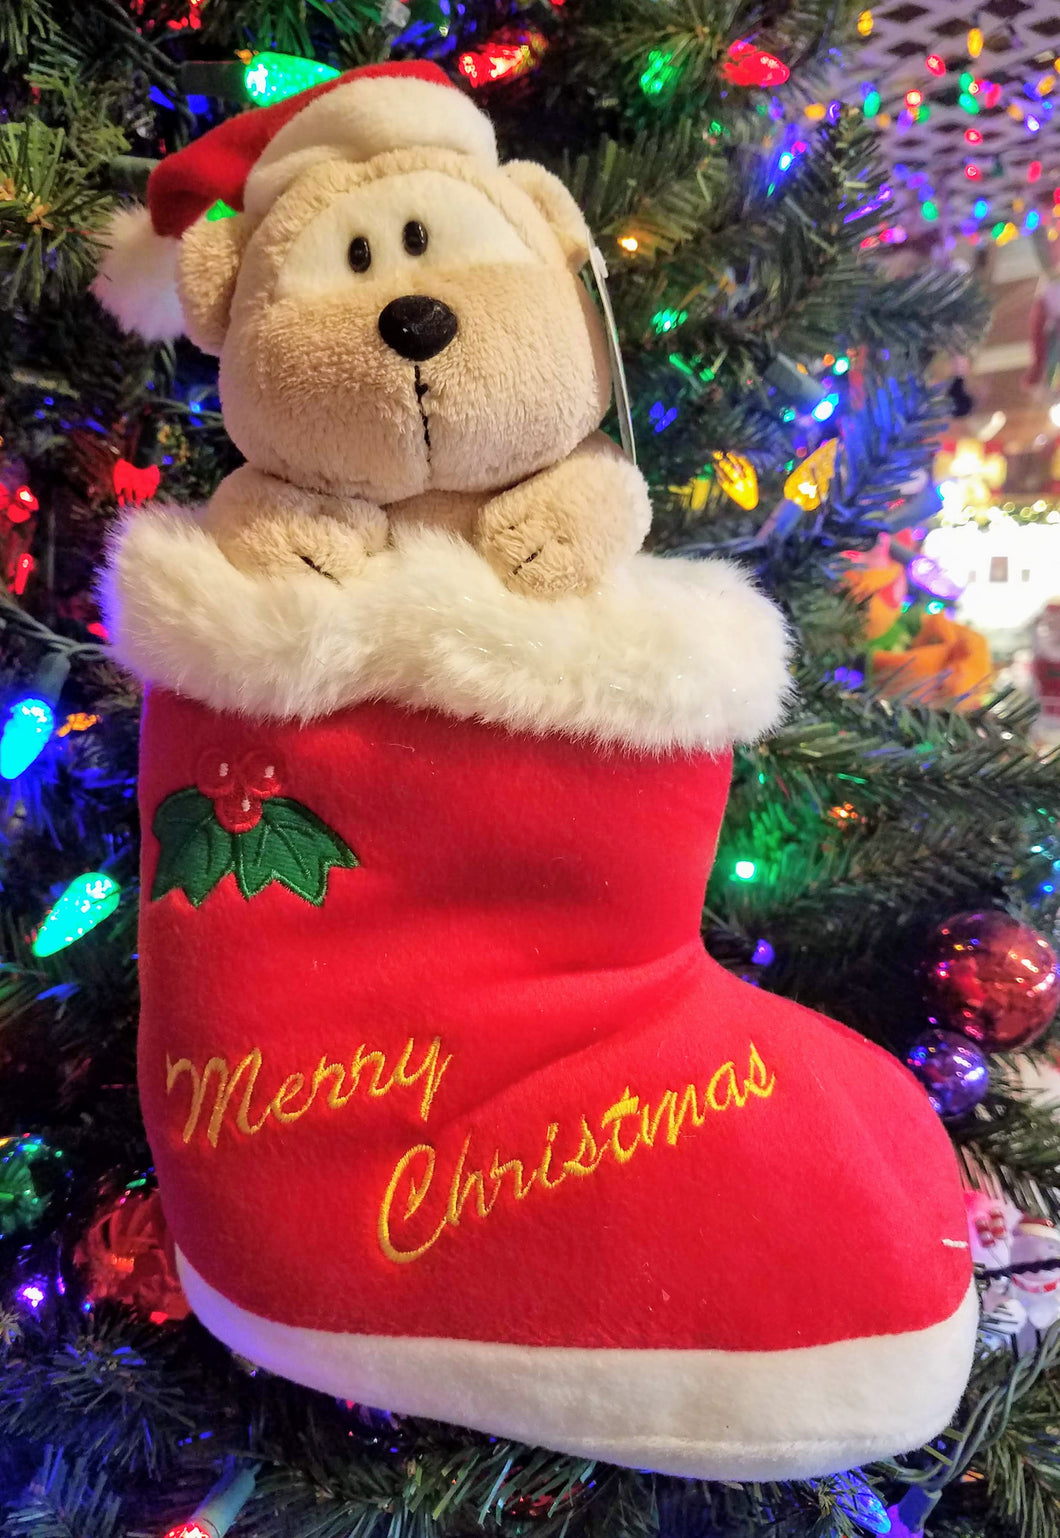 Plush red boot with bear - Merry Christmas